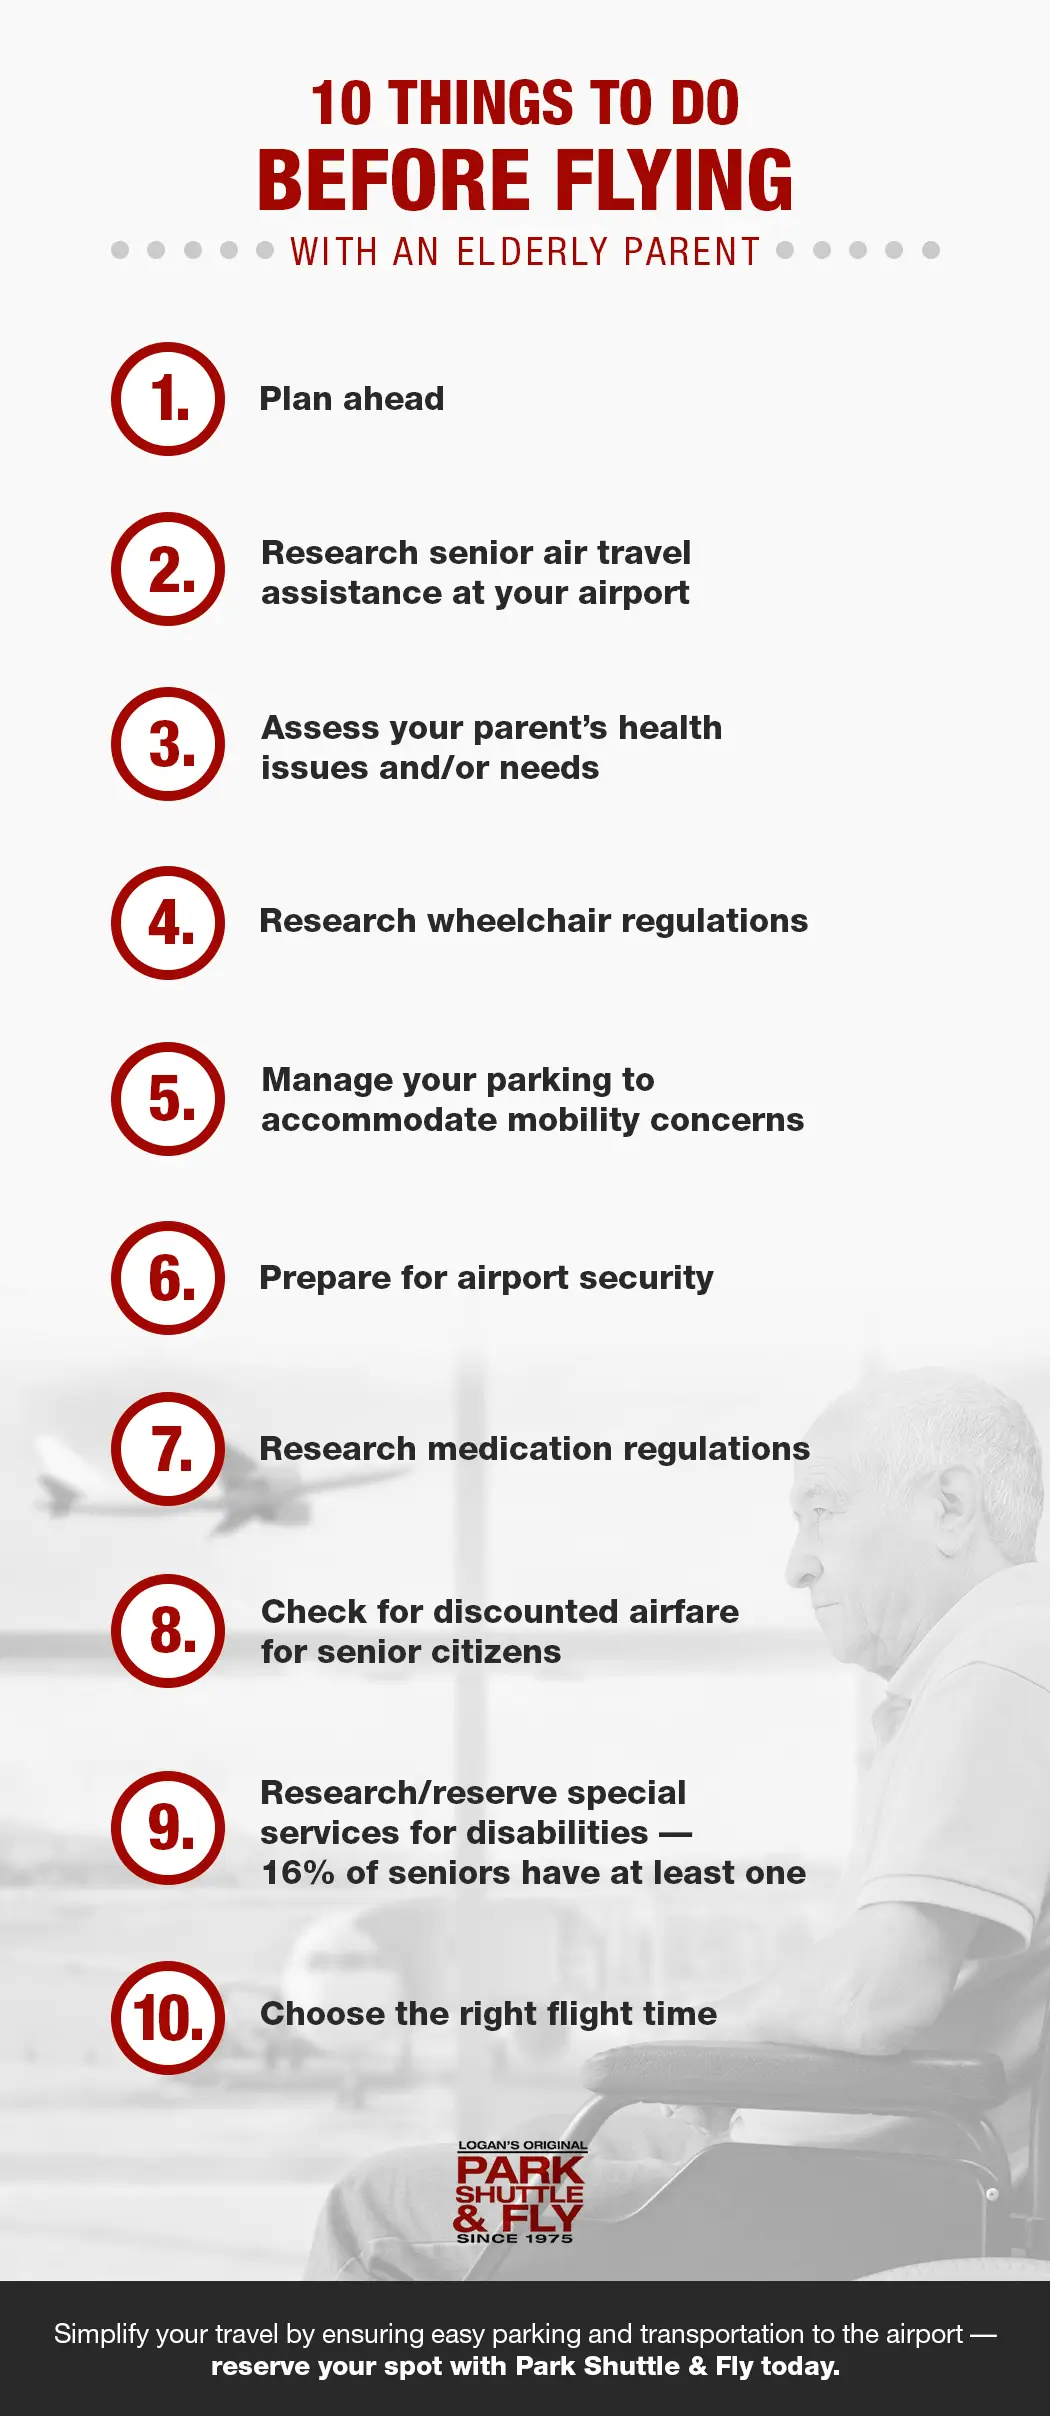 10 Tips for Flying with an Elderly Parent